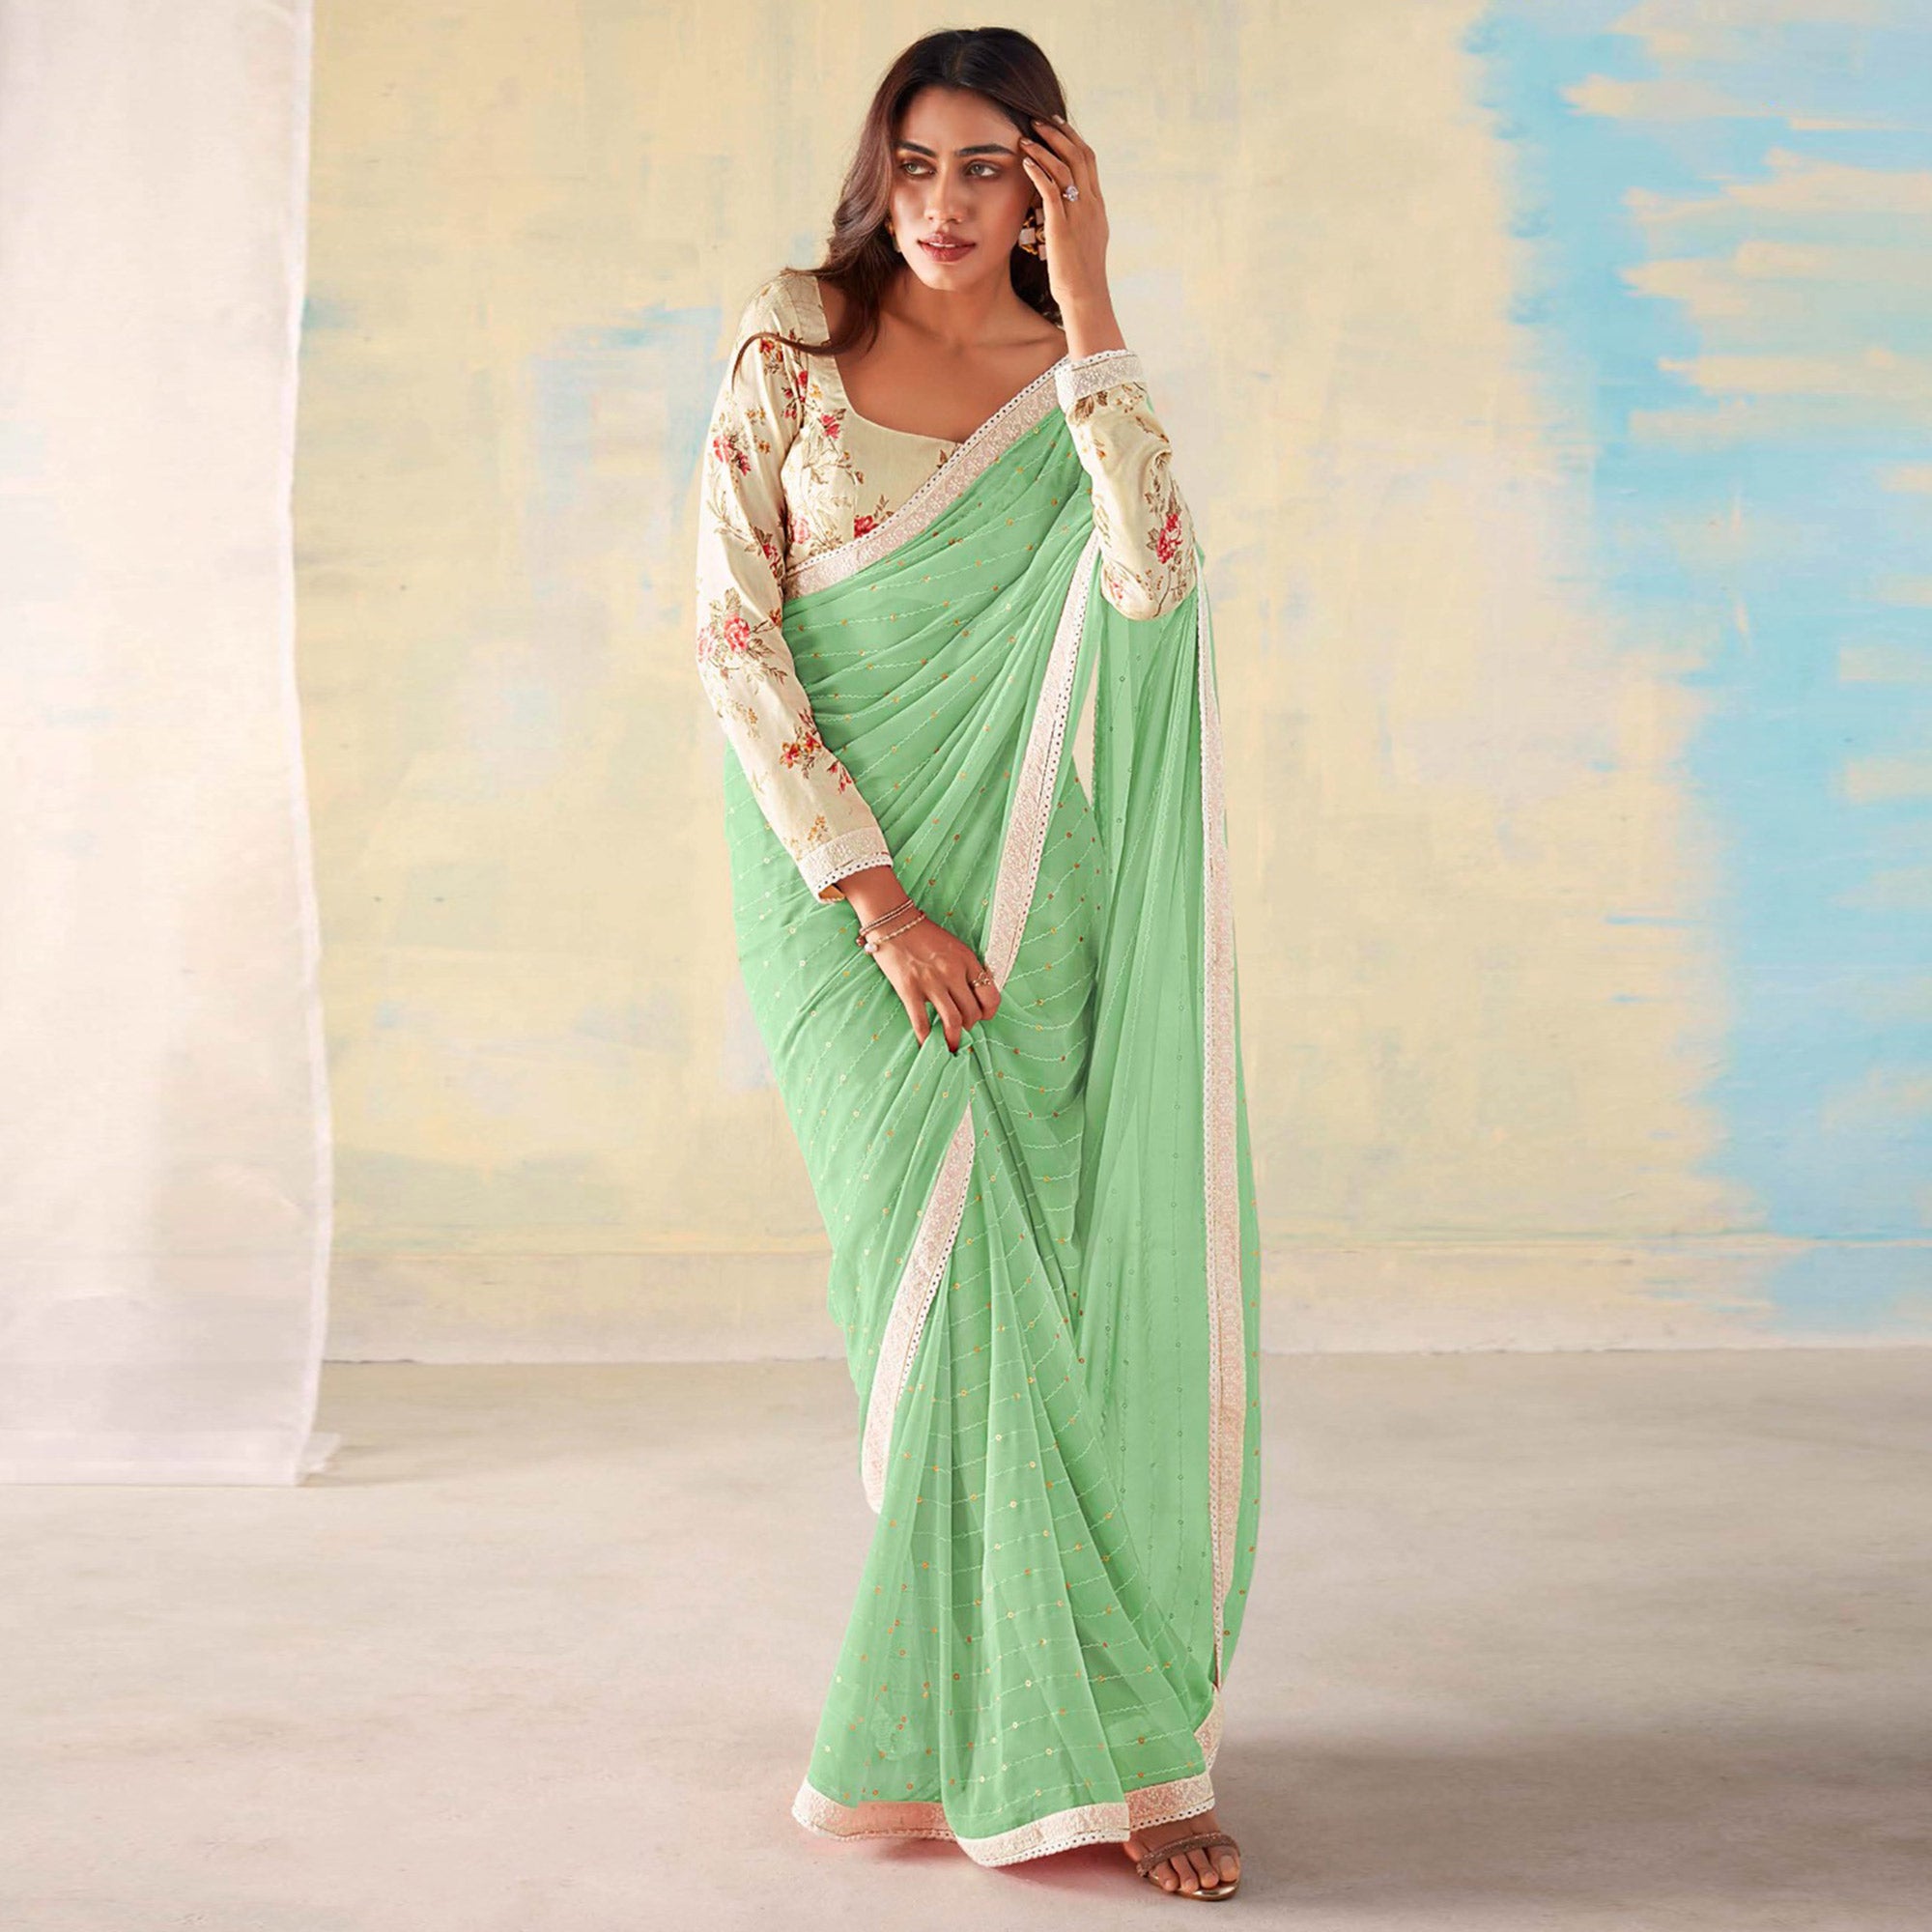 Sea Green Foil Printed Georgette Saree With Embroidered Border